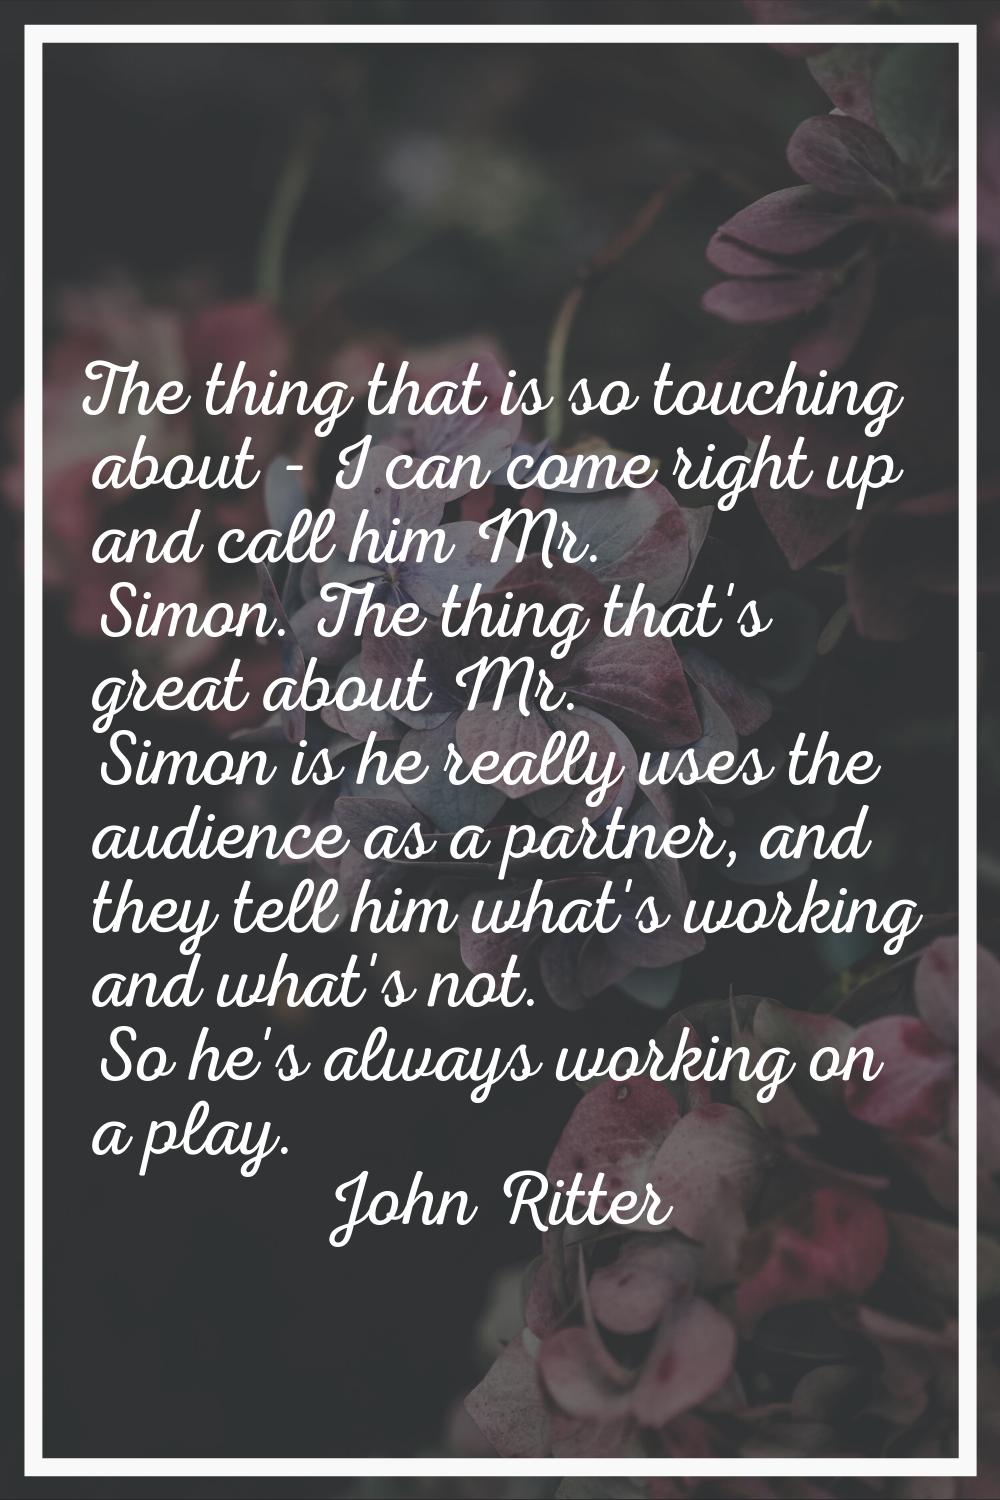 The thing that is so touching about - I can come right up and call him Mr. Simon. The thing that's 